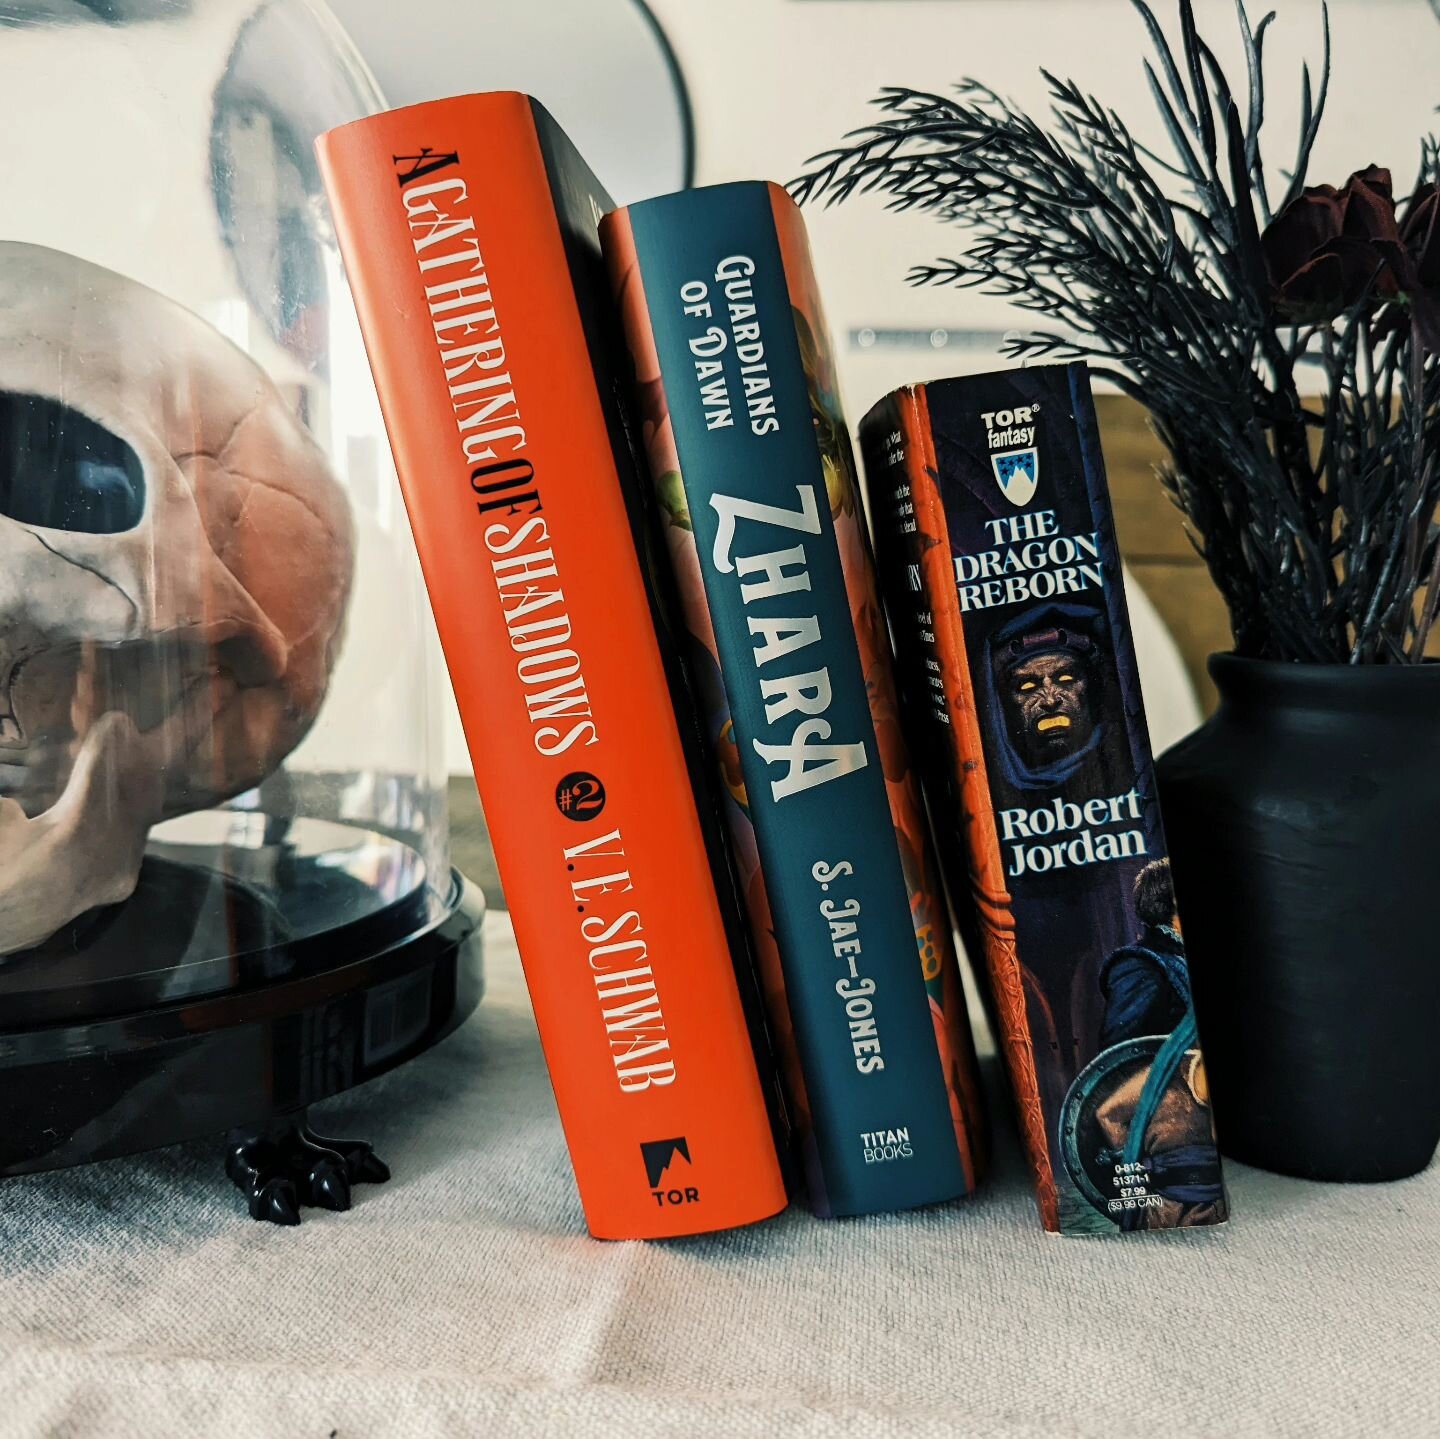 Do you prefer to read one book at a time or multiple? 

Usually I stick to one at a time, but lately I've been reading two or even three. Right now I'm reading A Gathering of Shadows in ebook, Zhara in hardcover, and The Dragon Reborn in audiobook. I